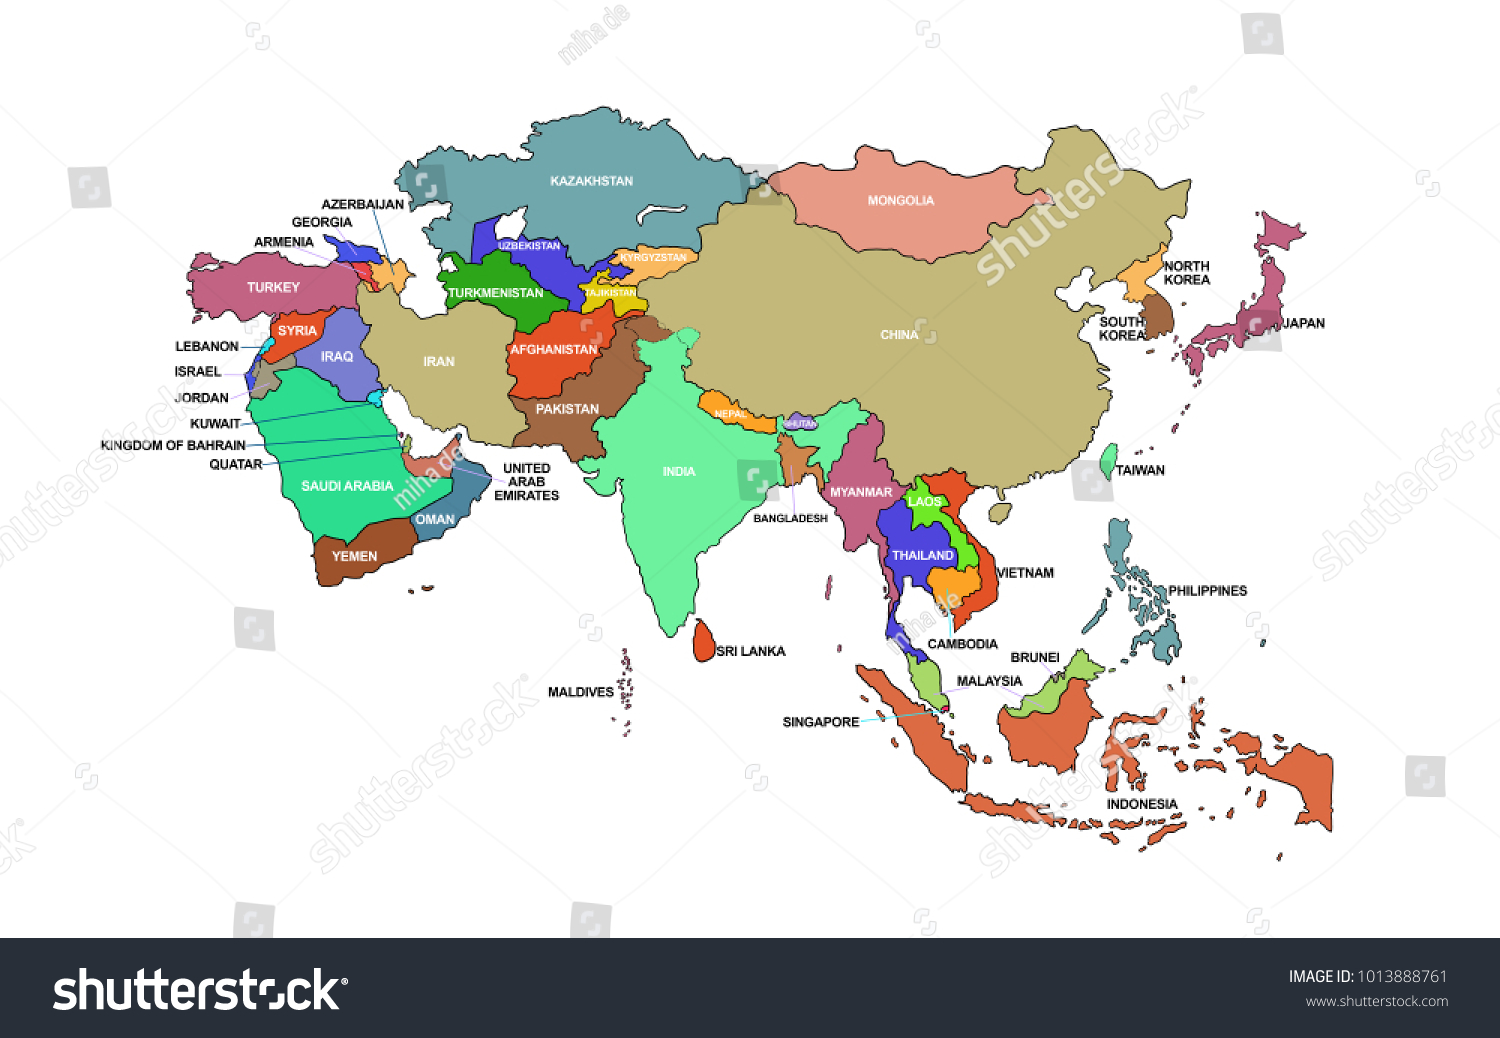 Asia Map All Countries All Names Stock Illustration 1013888761